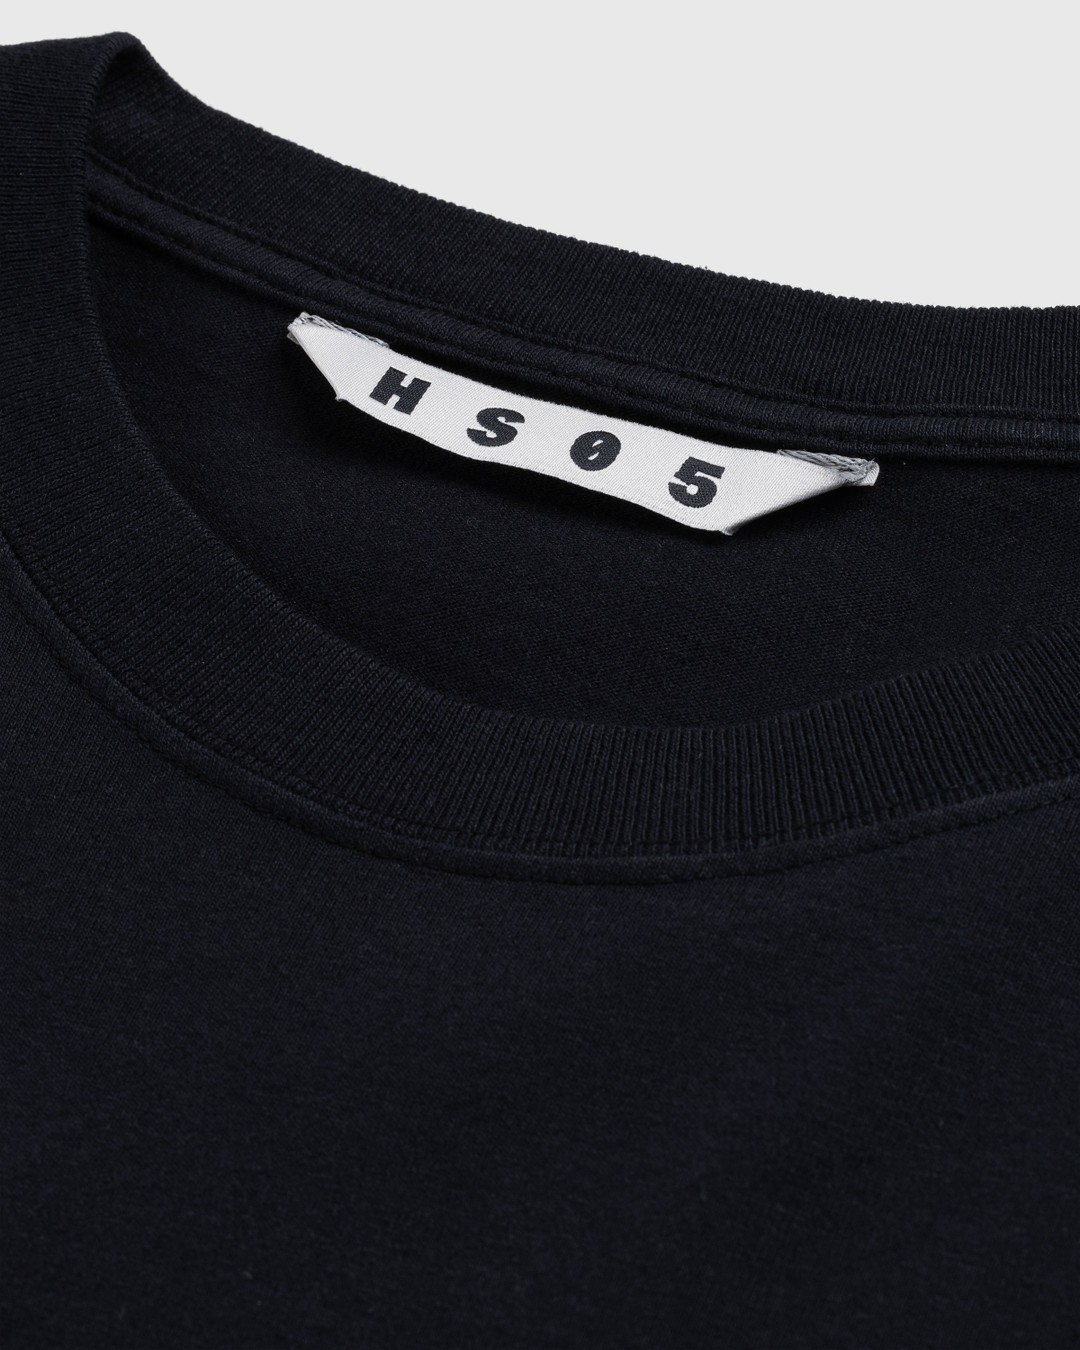 Highsnobiety HS05 – Pigment Dyed Boxy Long Sleeves Jersey Black - Longsleeves - Black - Image 6